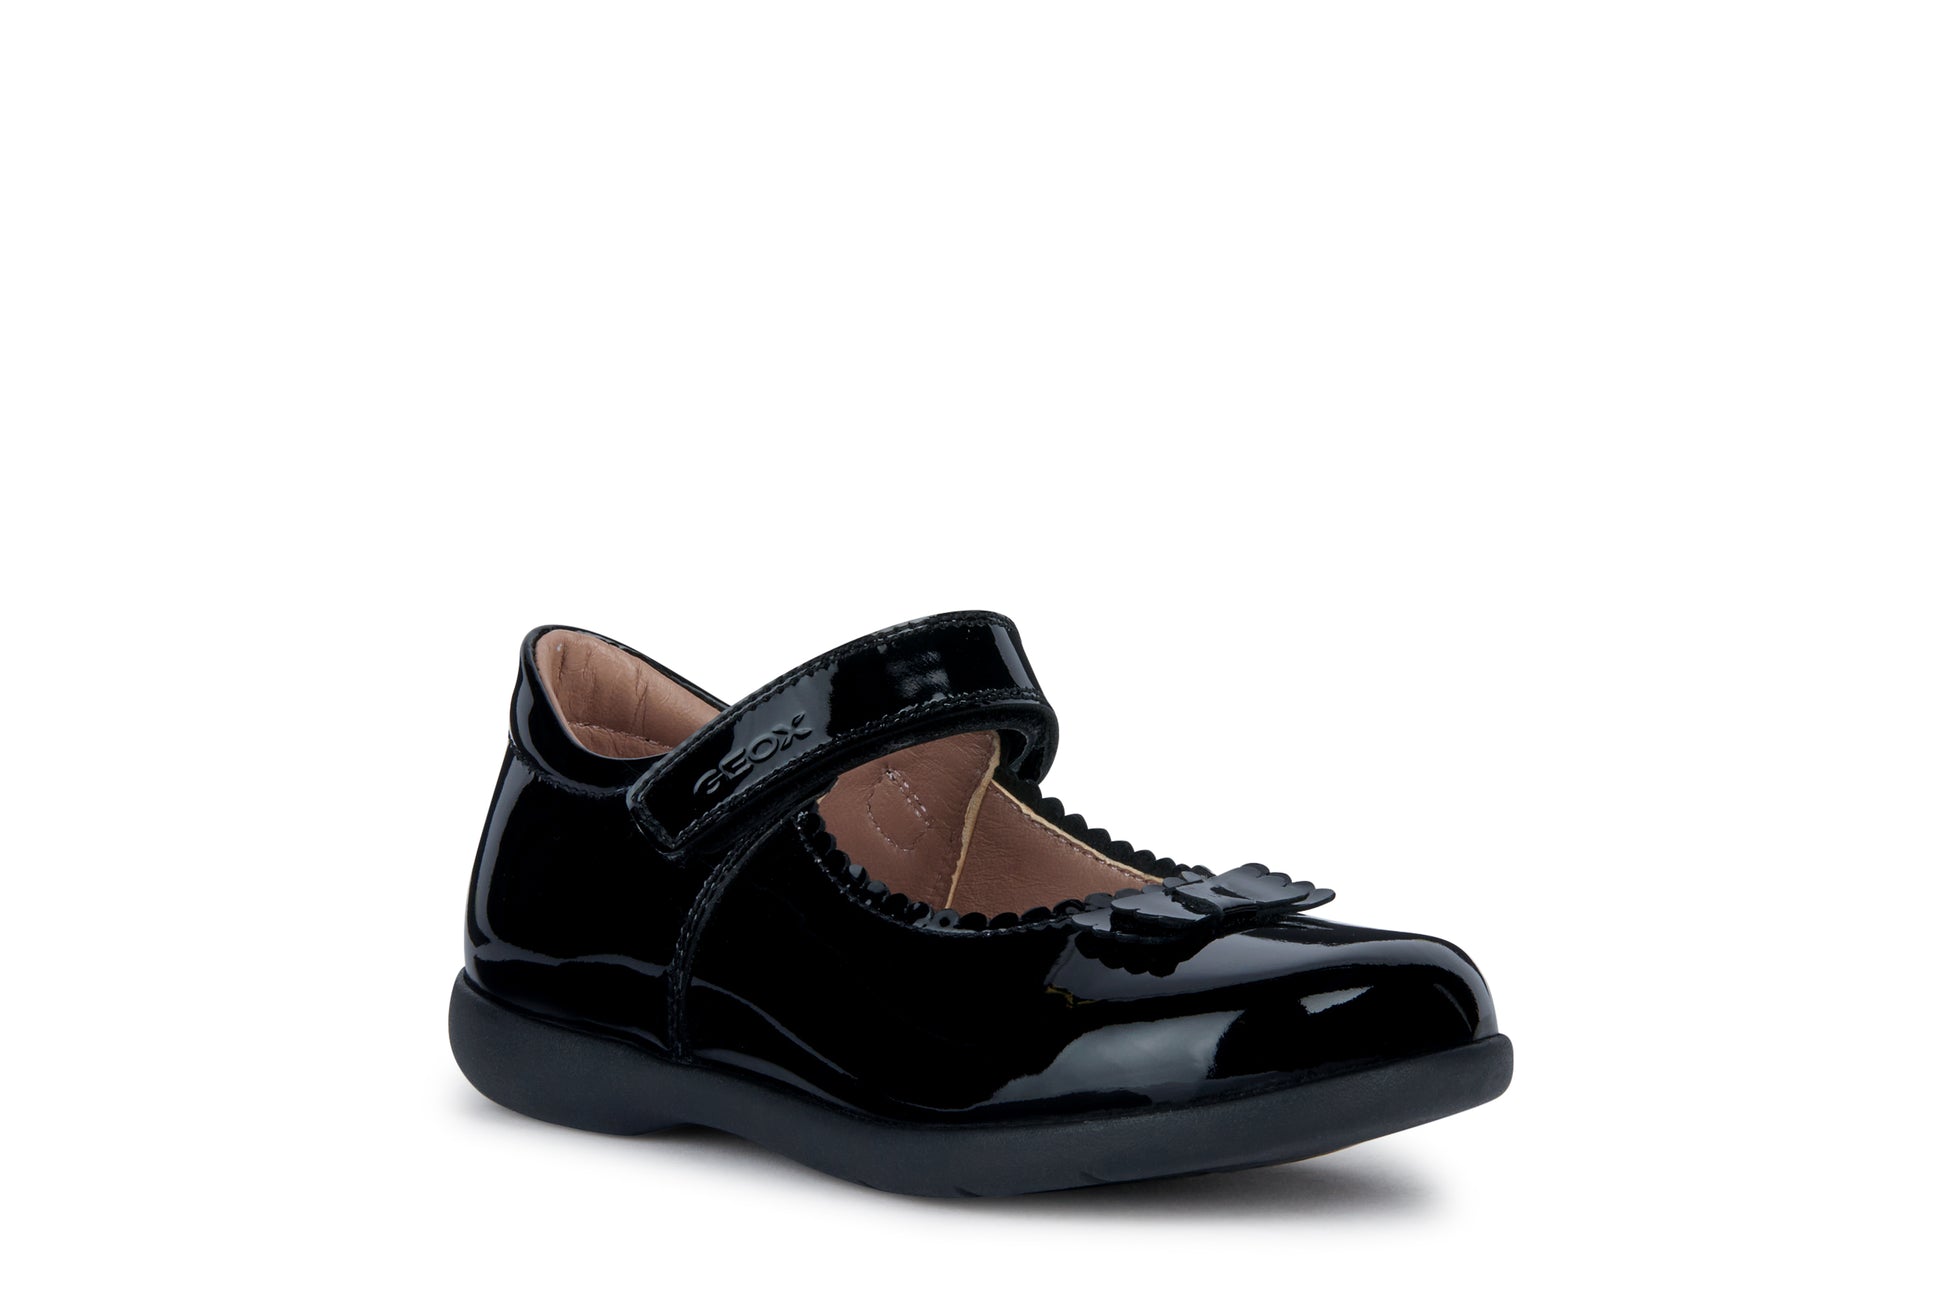 A girls school shoe by Geox, style Naimara in black patent with a velcro strap. Right angled view.